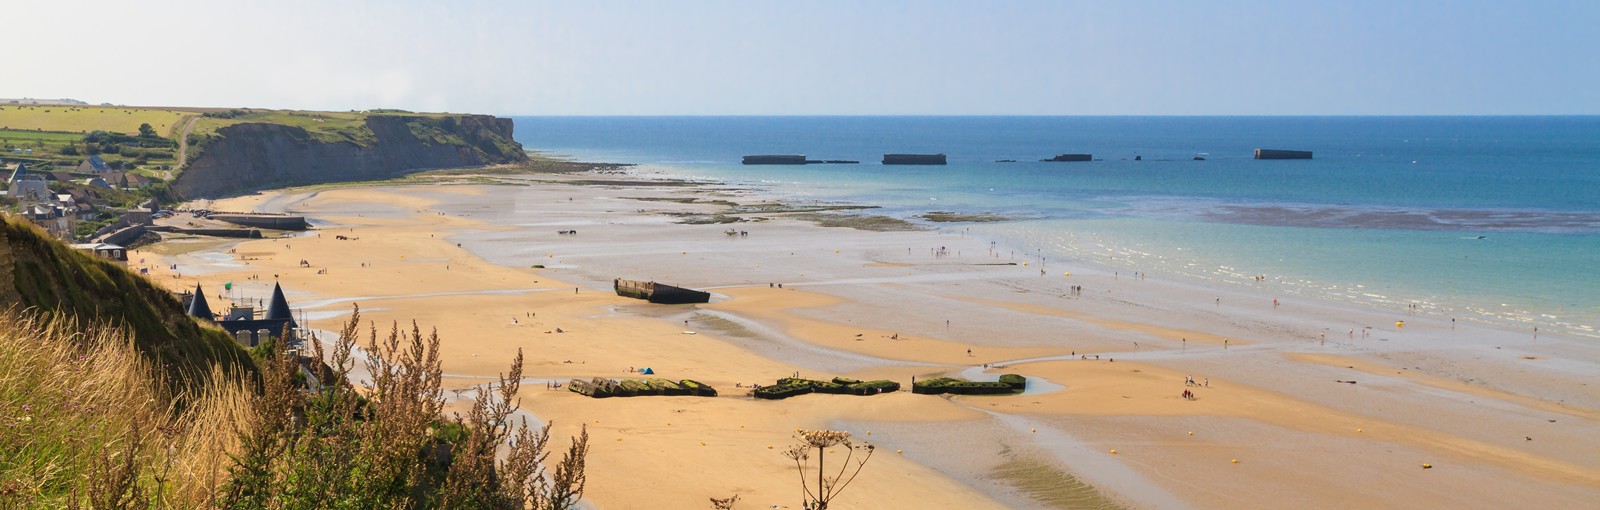 Tours The ‘D.Day’ Landing Beaches - Full days - Day tours from Paris